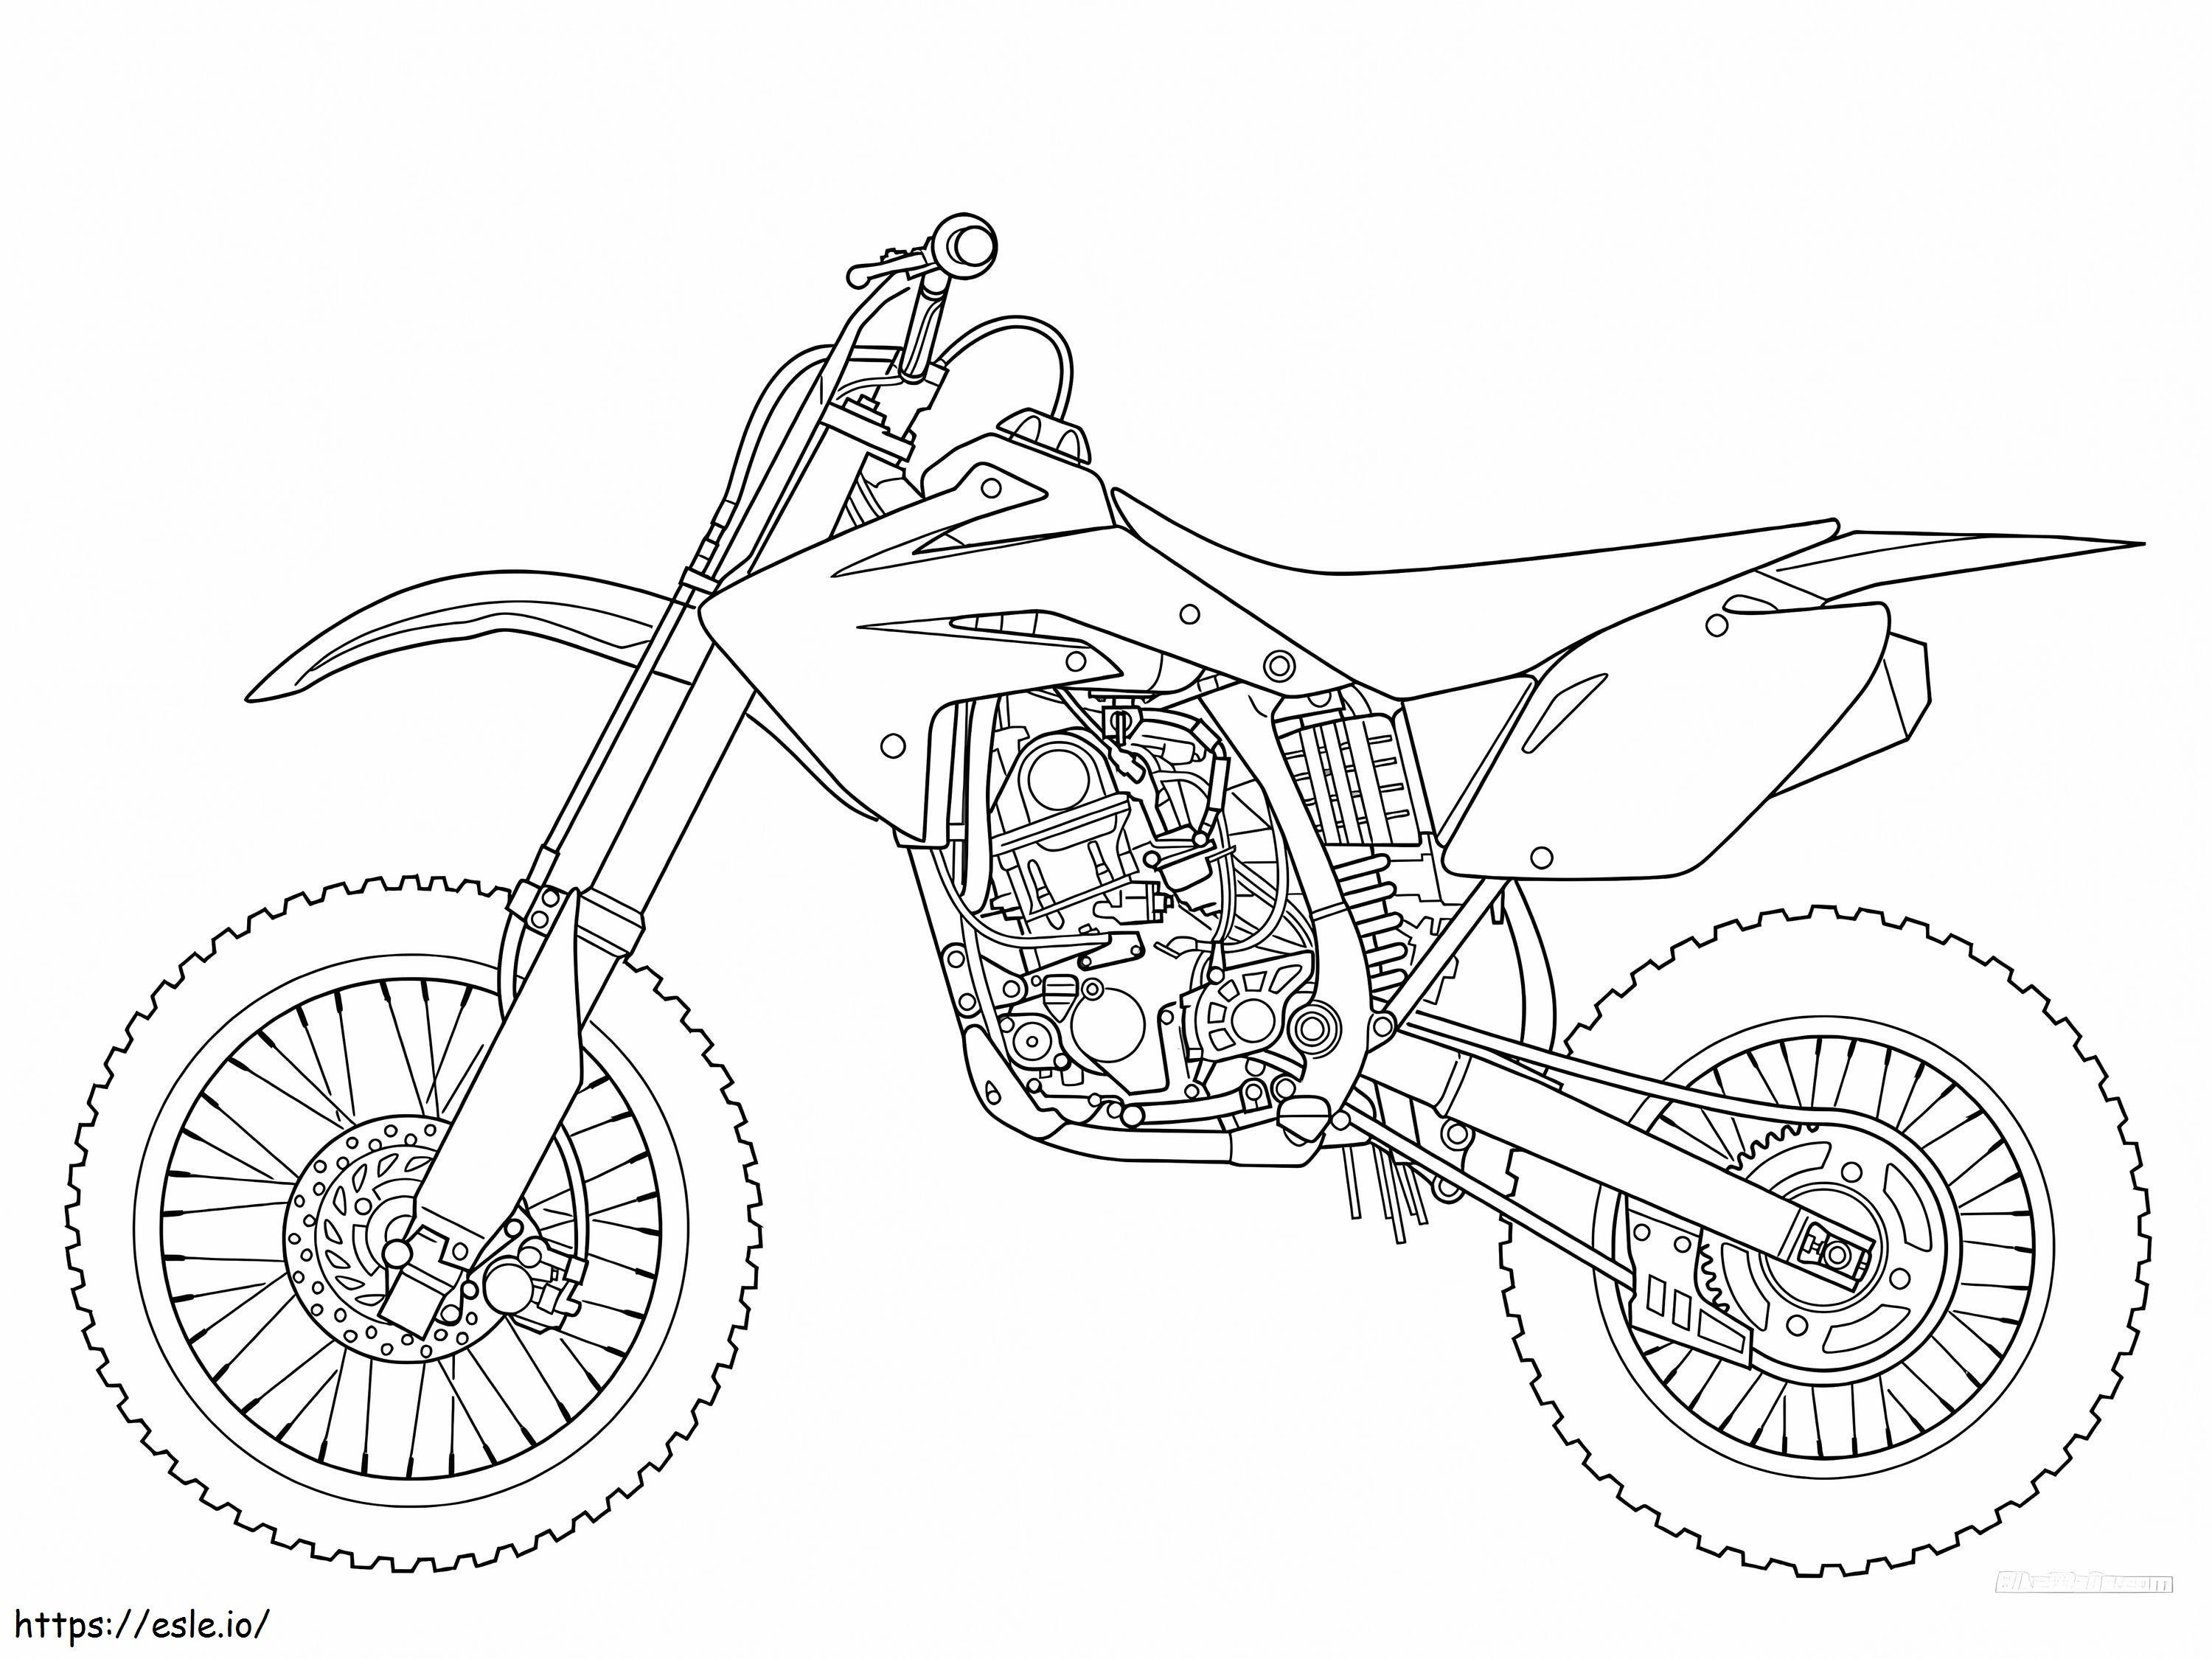 Sports Motorcycle coloring page